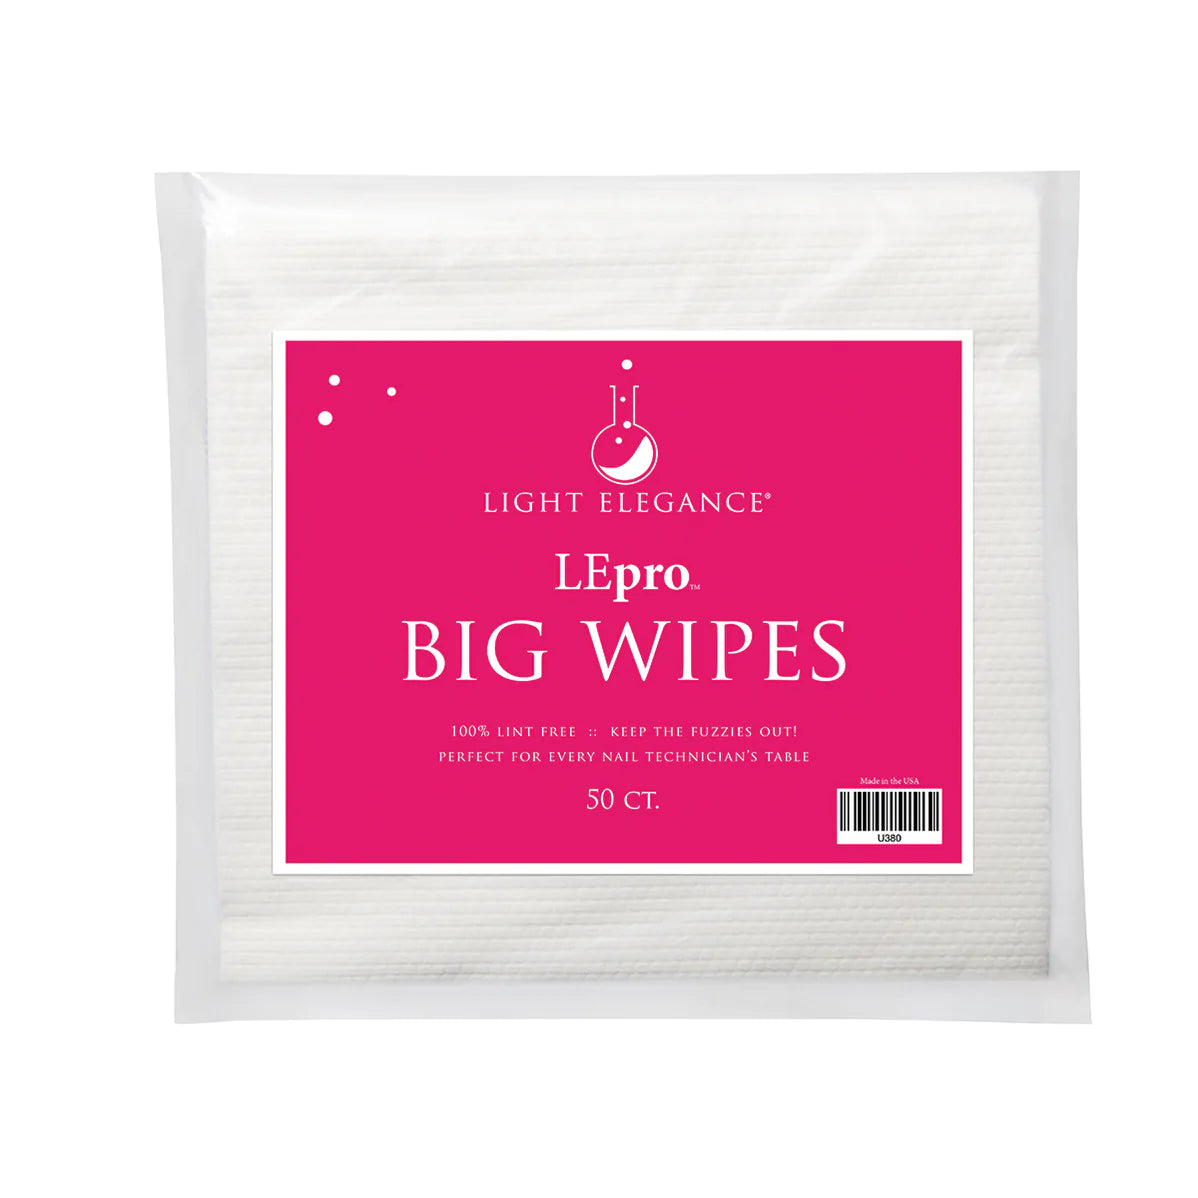 LEpro Big Wipes, Perfect for the Nail Technician's Table. 50 Count